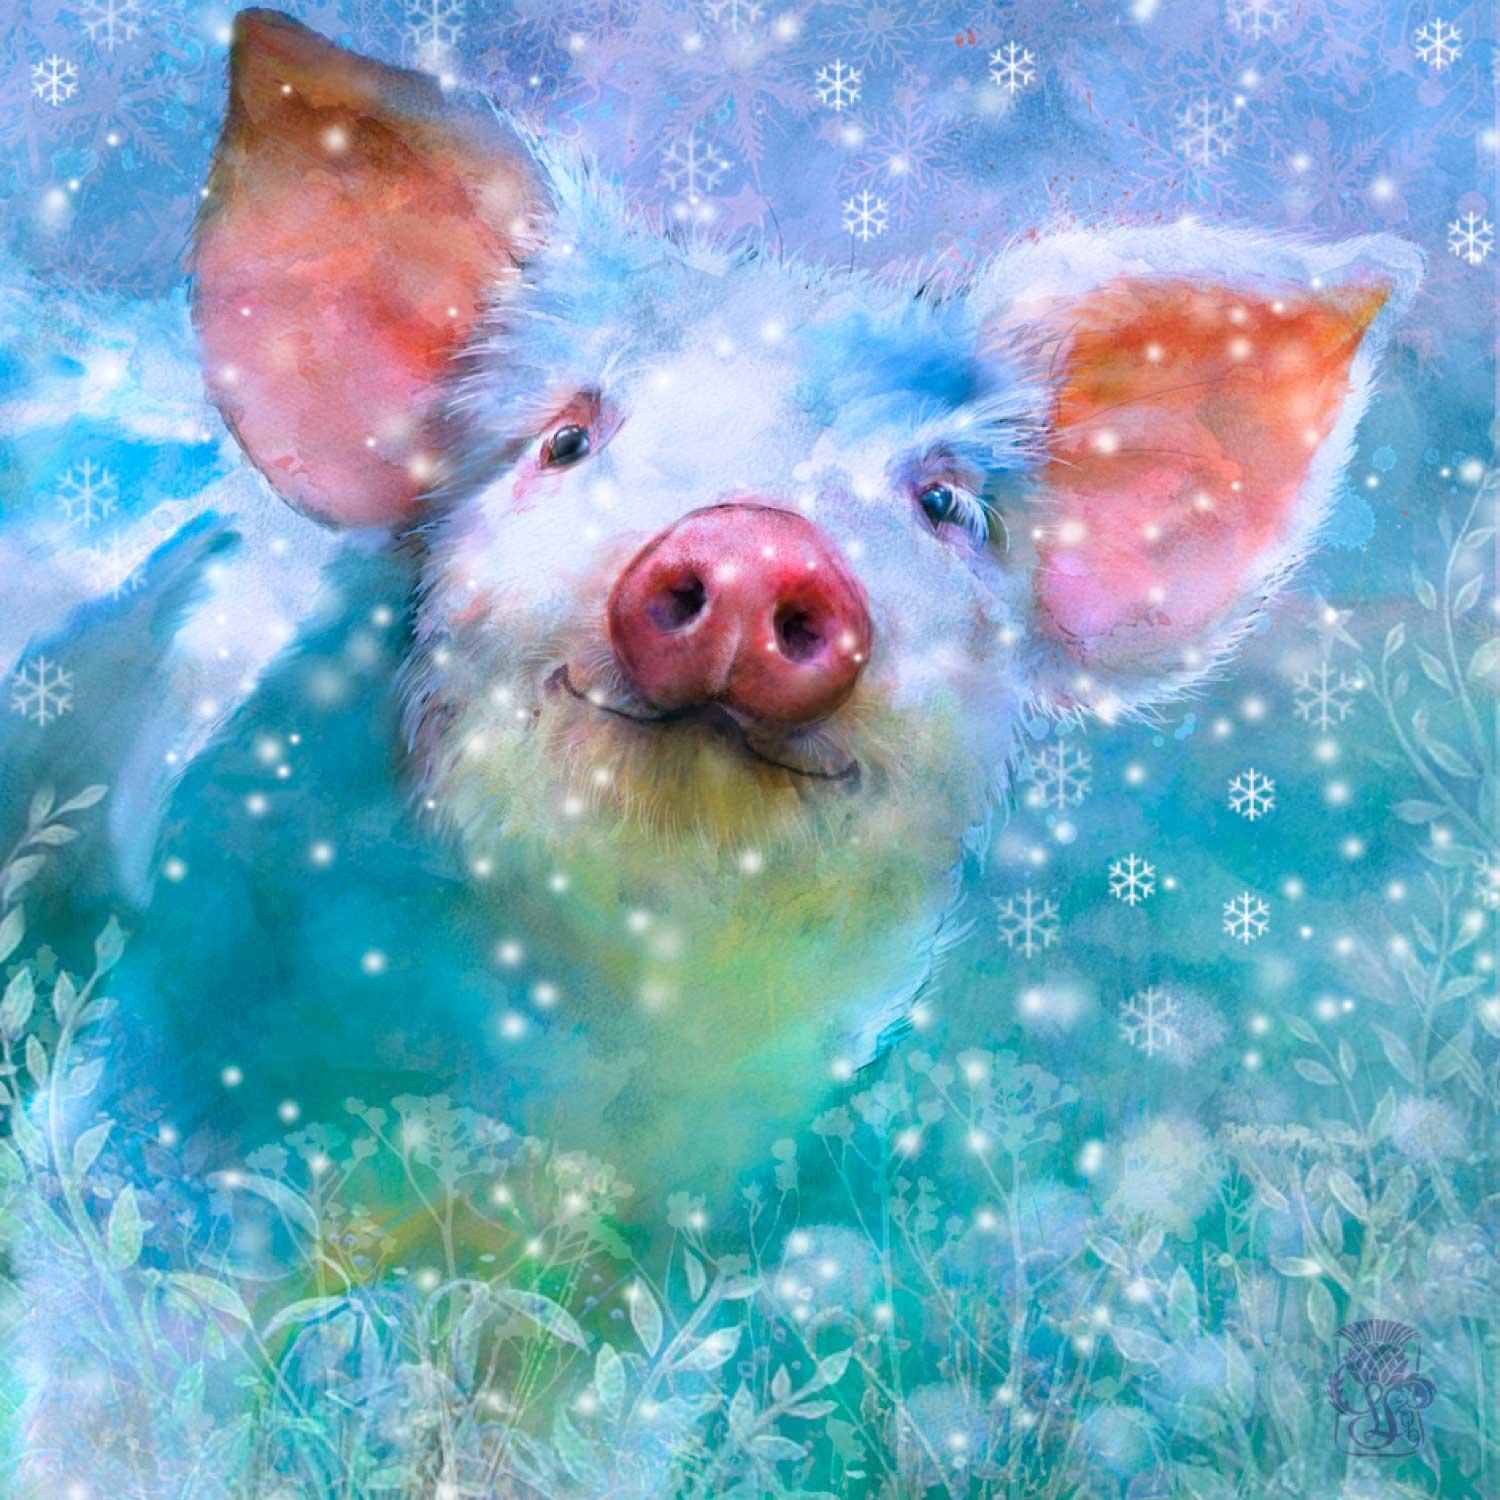 Christmas Piglet by artist Lee Scammacca